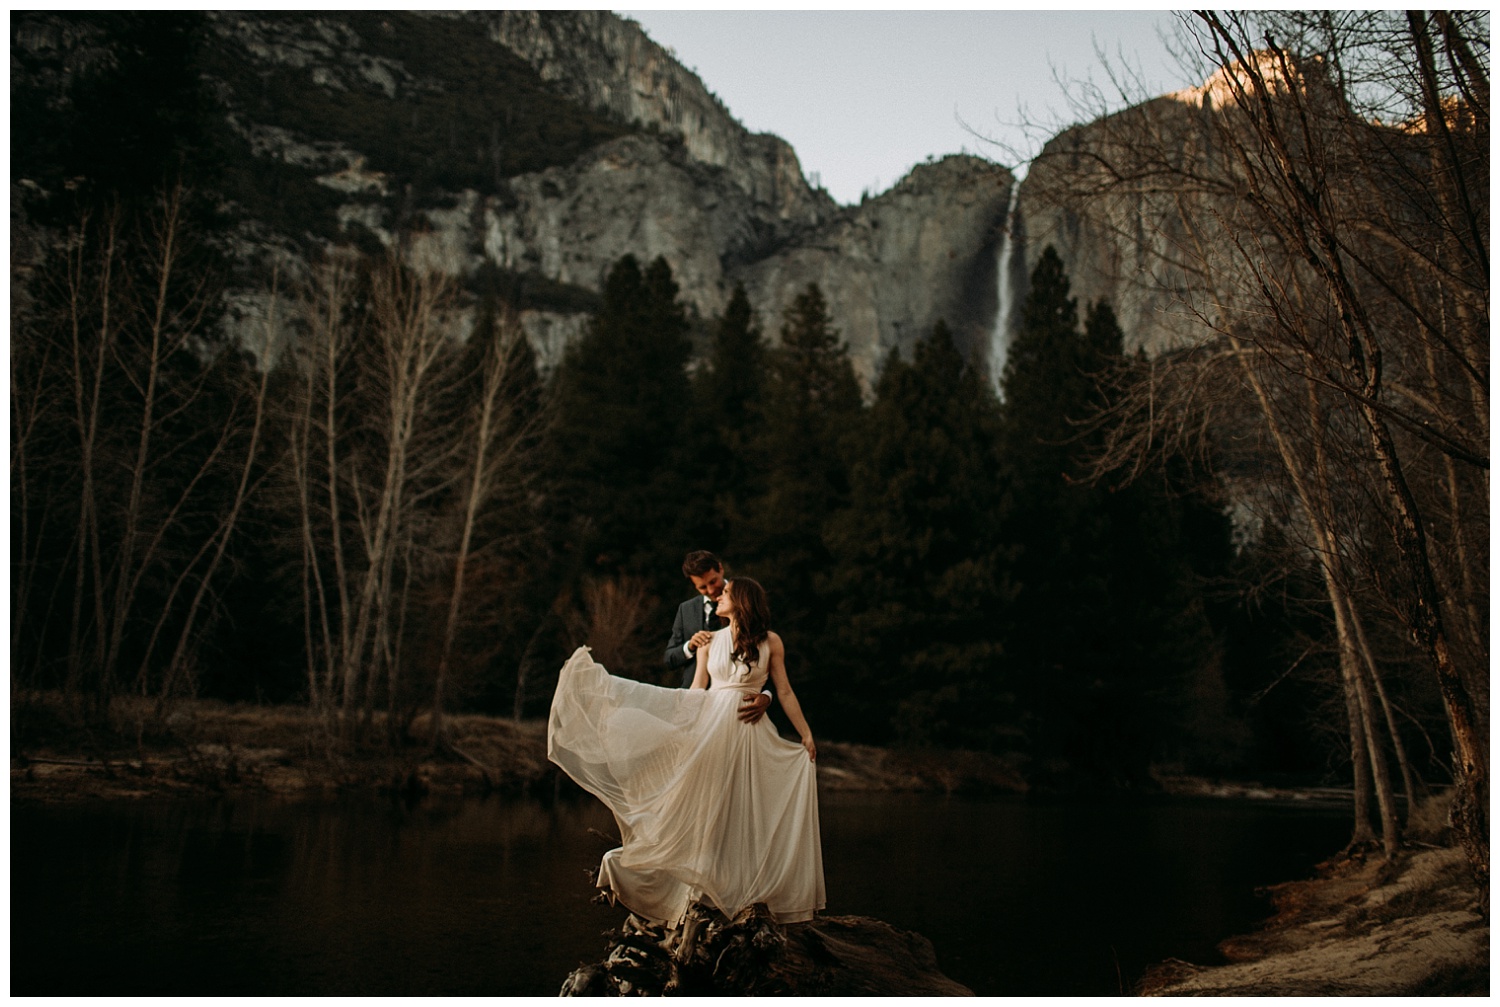 This couple chose to elope in Yosemite National Park